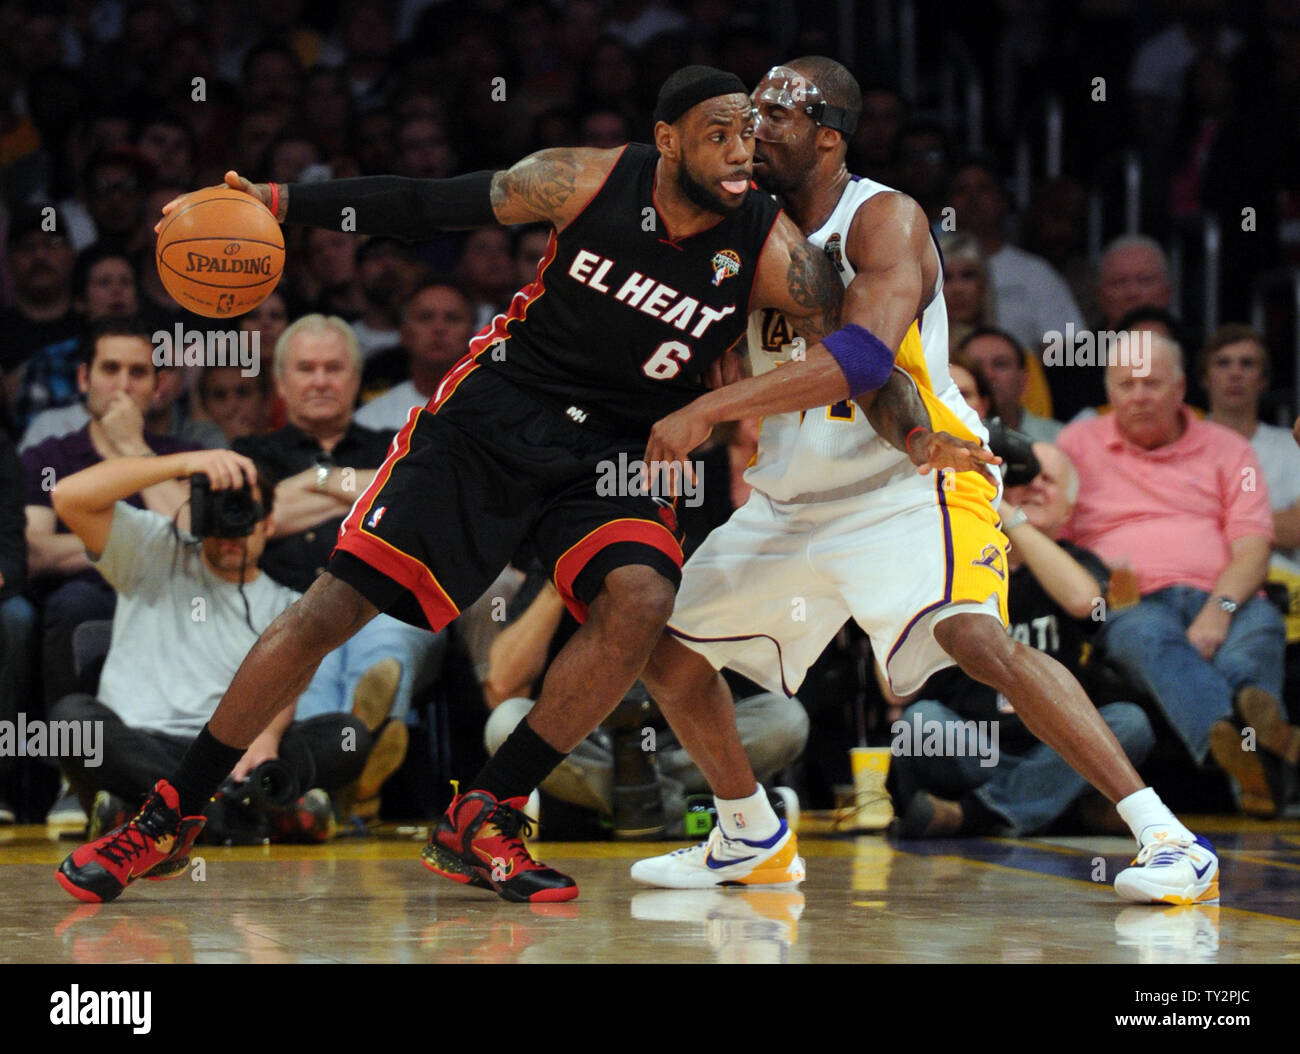 Los Angeles Lakers shooting guard Kobe Bryant (24) plays tight defense on Miami Heat small forward LeBron James (6) in the first half of  their NBA basketball game in Los Angeles on March 4, 2012.    UPI/Lori Shepler Stock Photo